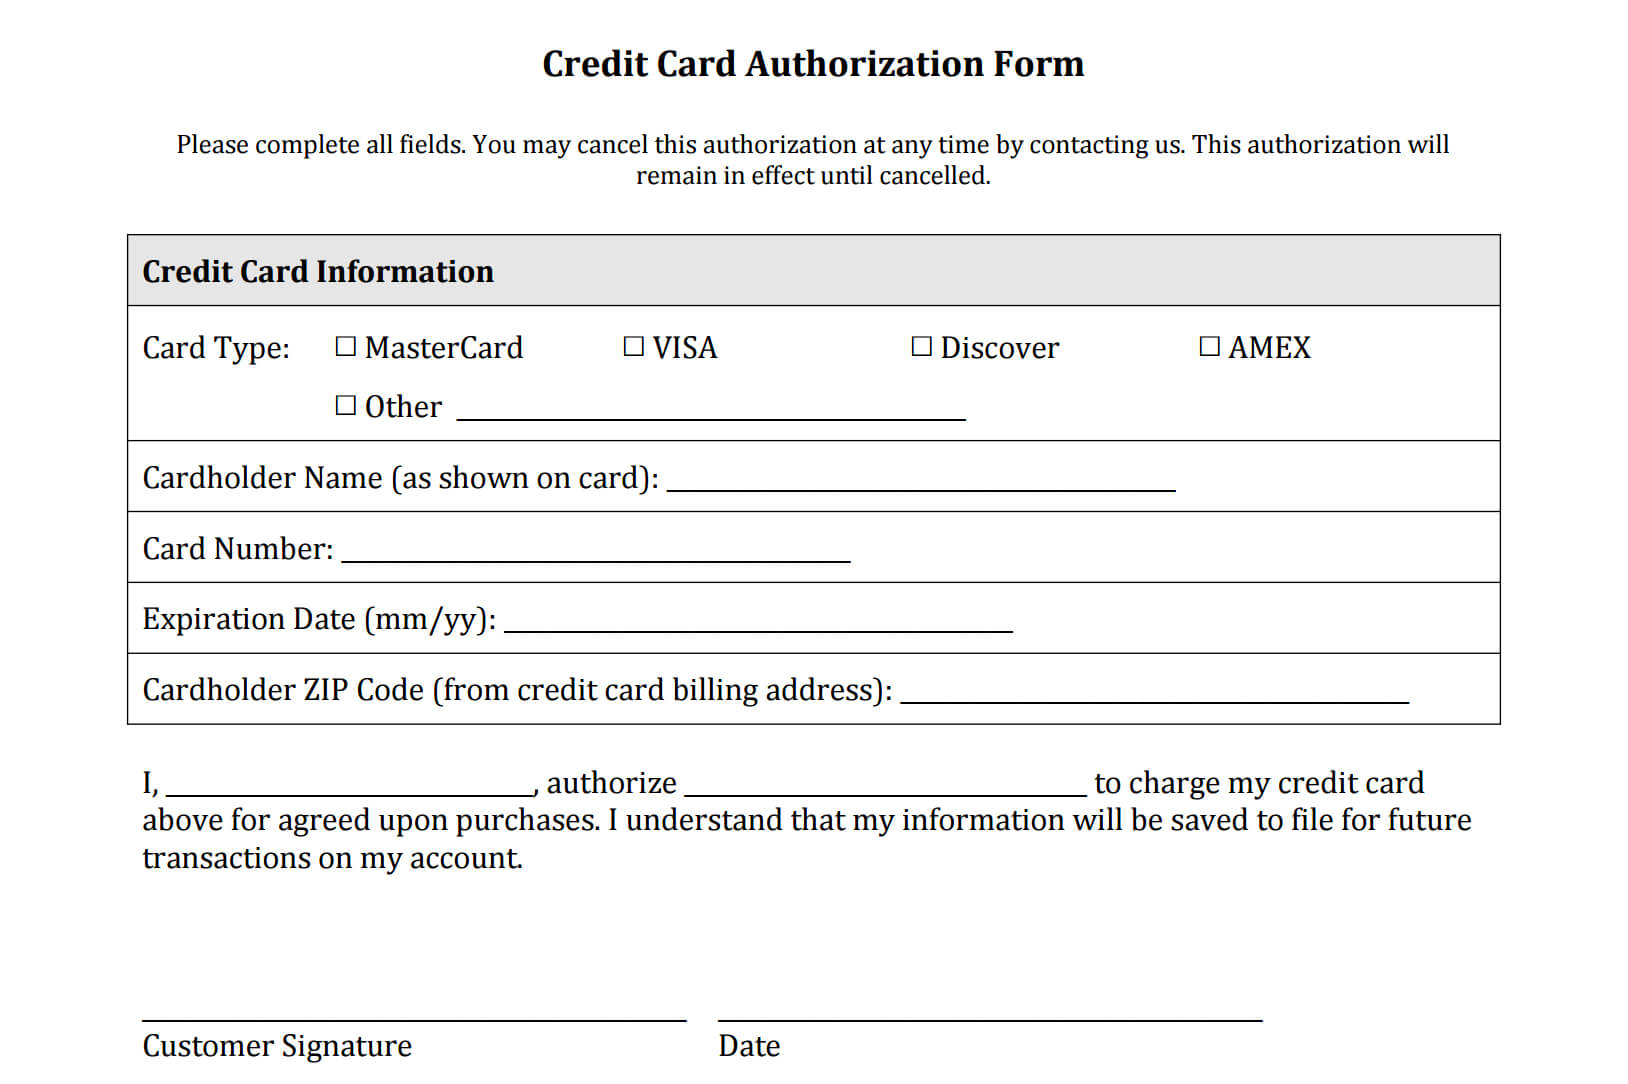 Credit Authorization Form | Types Of Credit Cards, Credit Pertaining To Credit Card Authorisation Form Template Australia